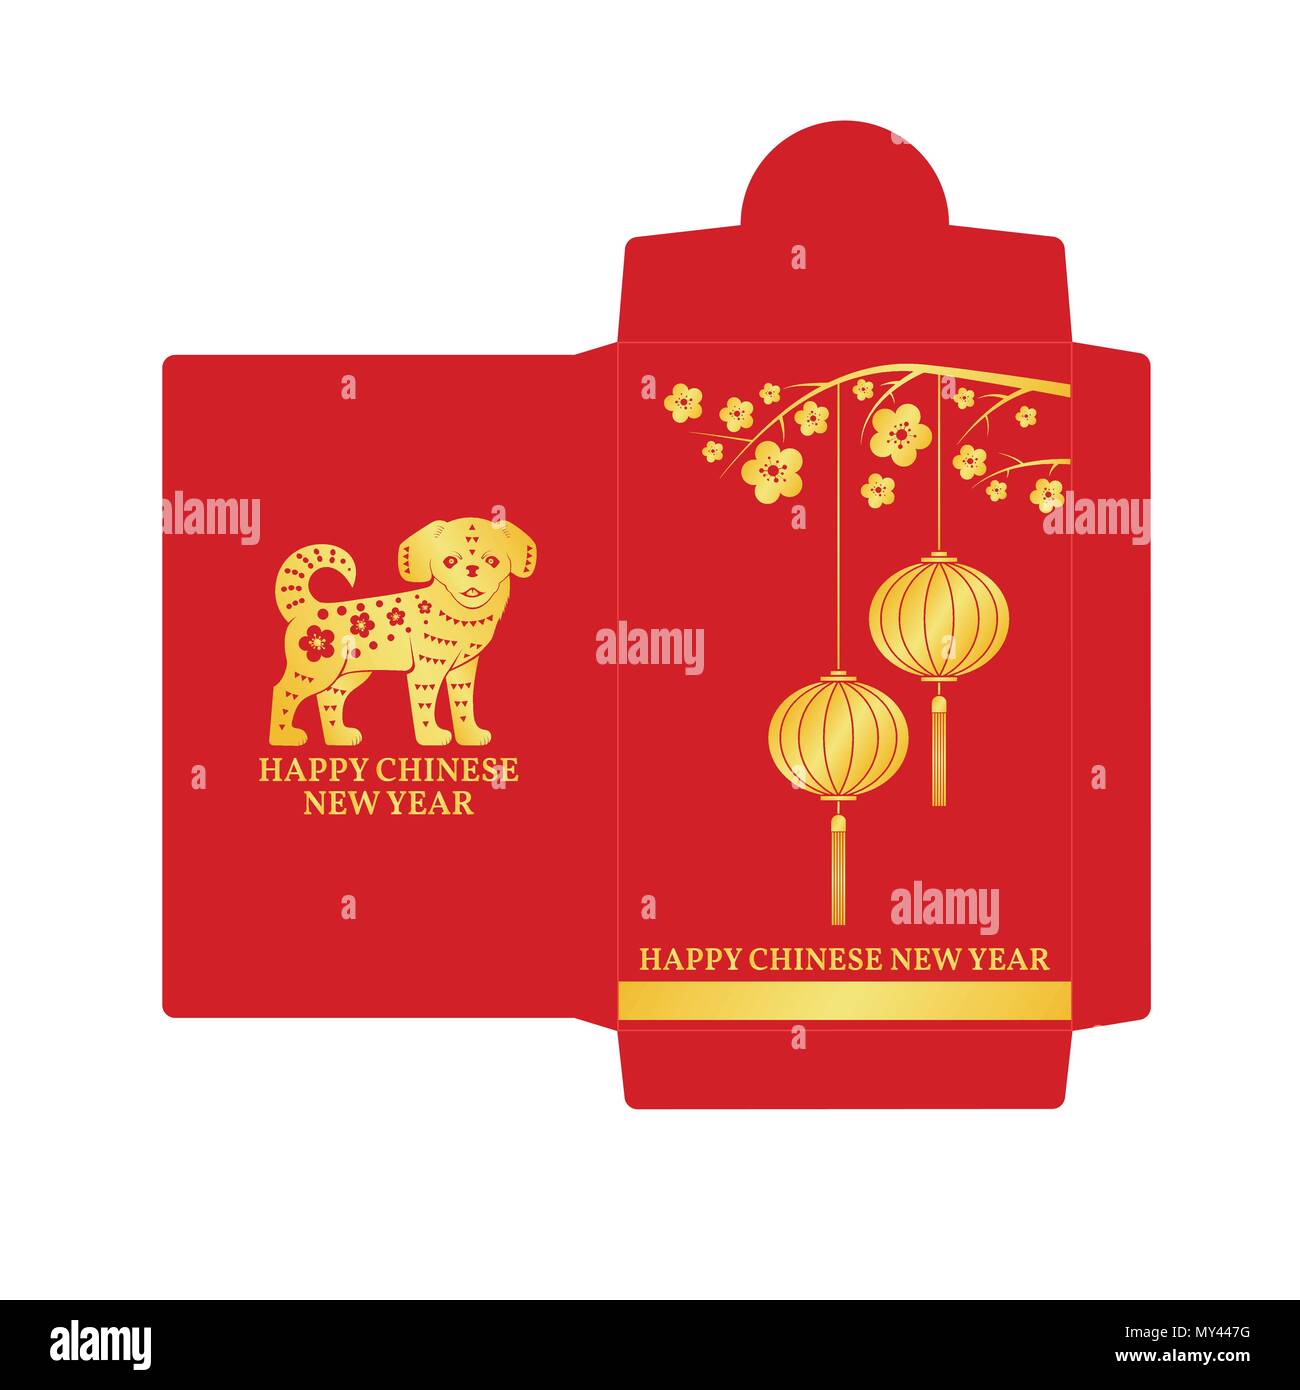 Chinese New Year red envelope flat icon. Vector illustration. Red packet with gold dog and lanterns. Stock Vector